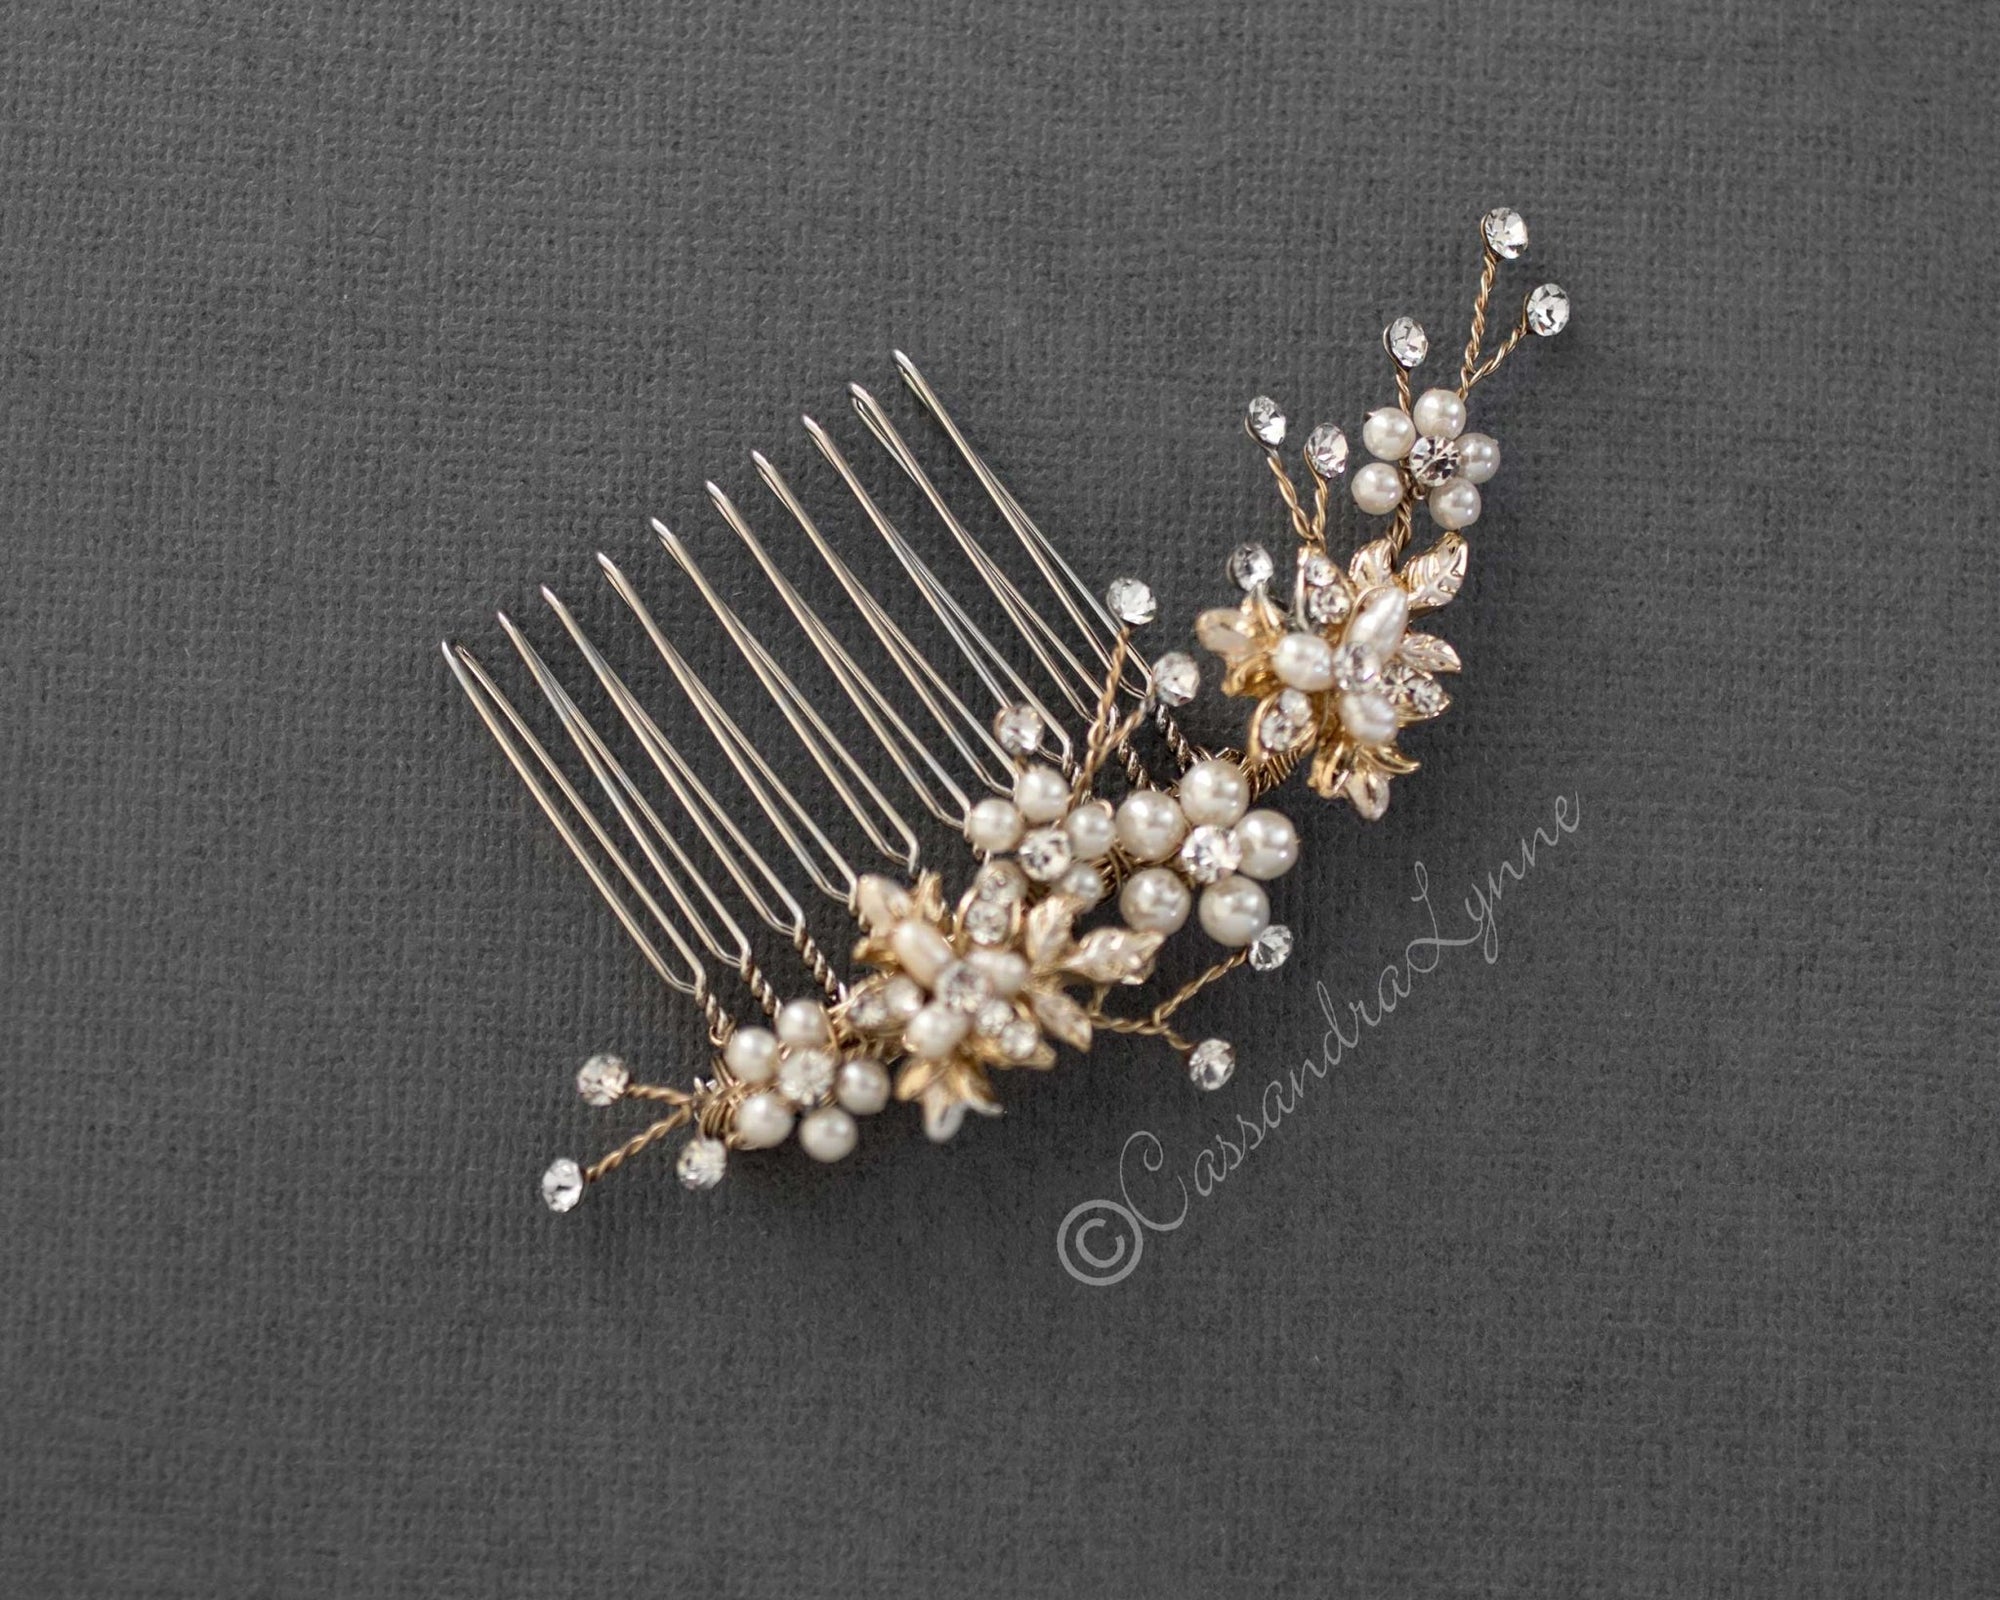 Small Delicate Bridal Hair Comb with Pearls - Cassandra Lynne